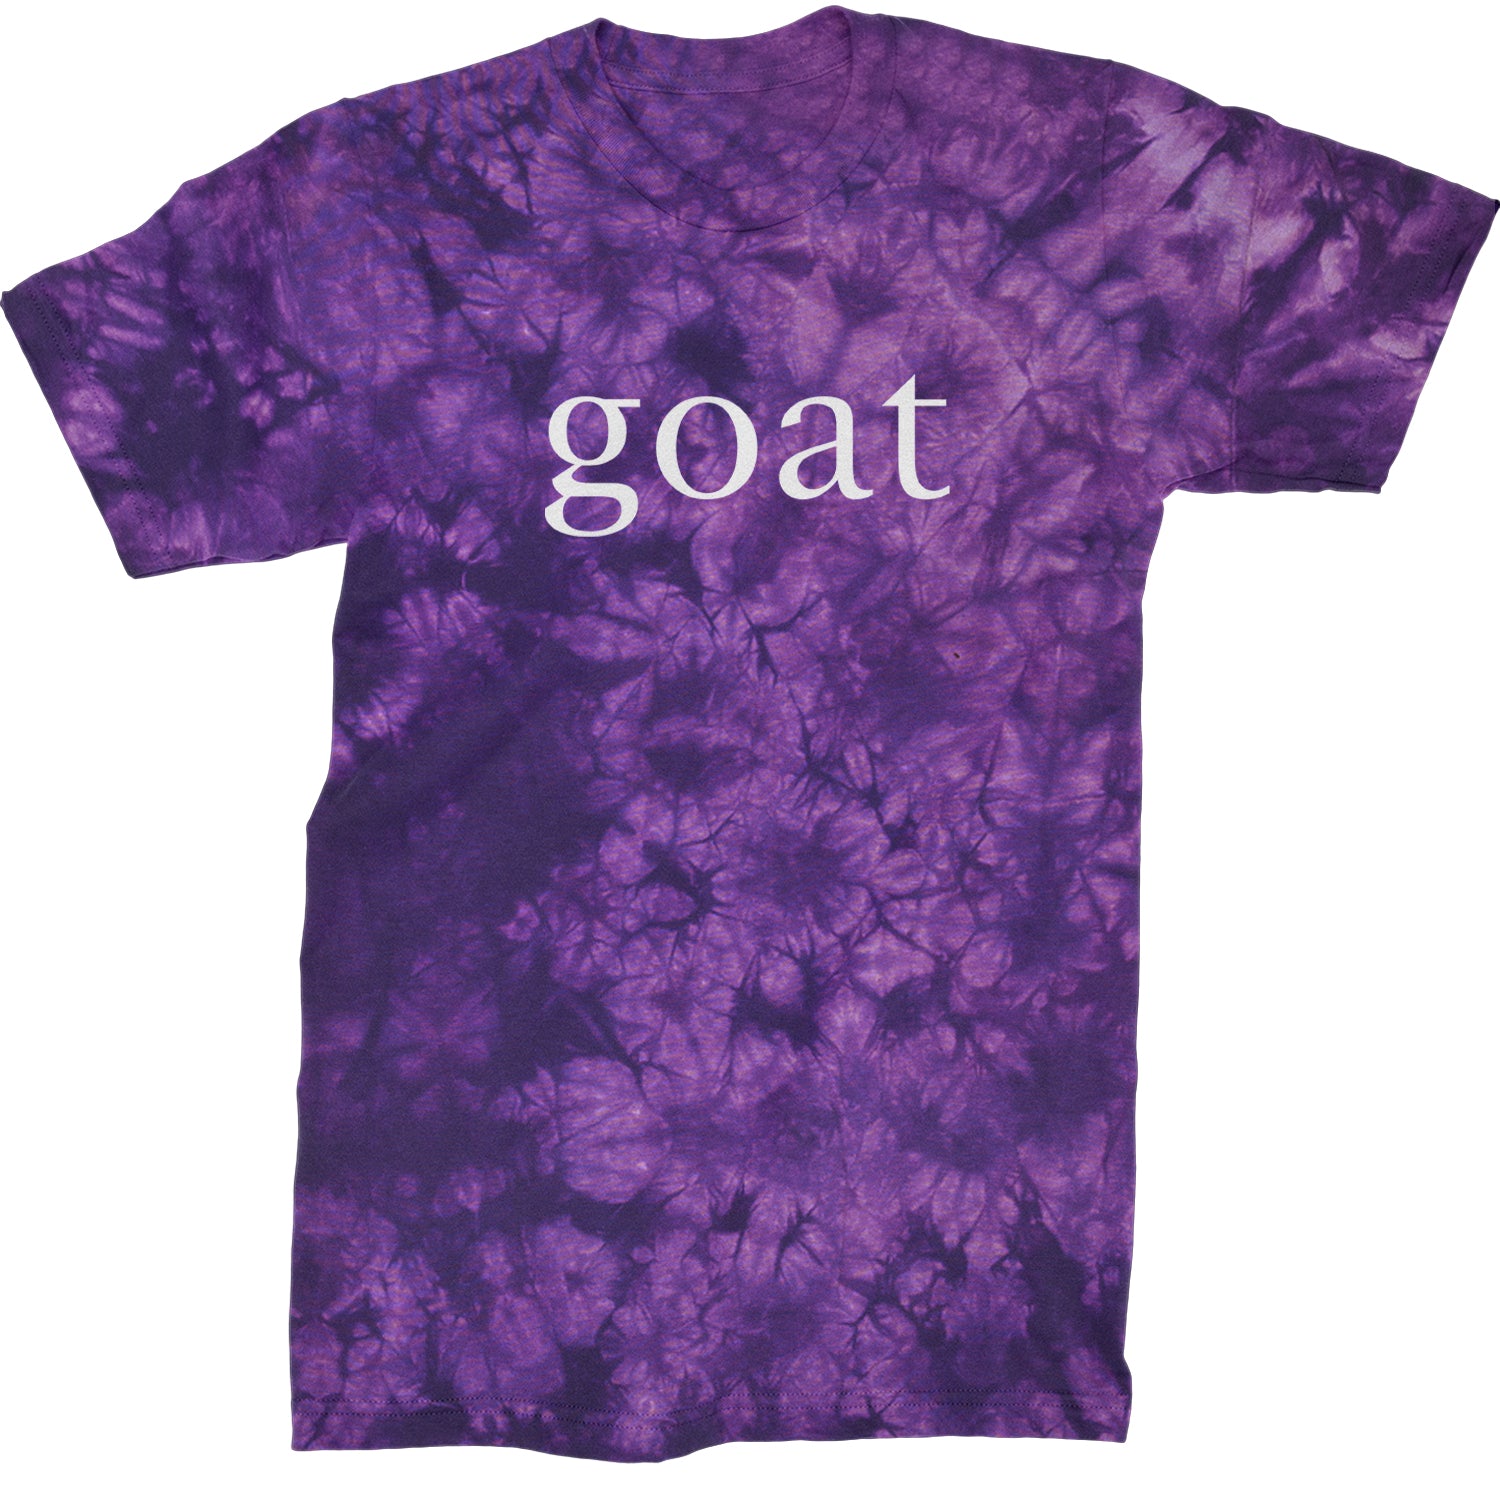 GOAT - Greatest Of All Time  Mens T-shirt Tie-Dye Crystal Purple